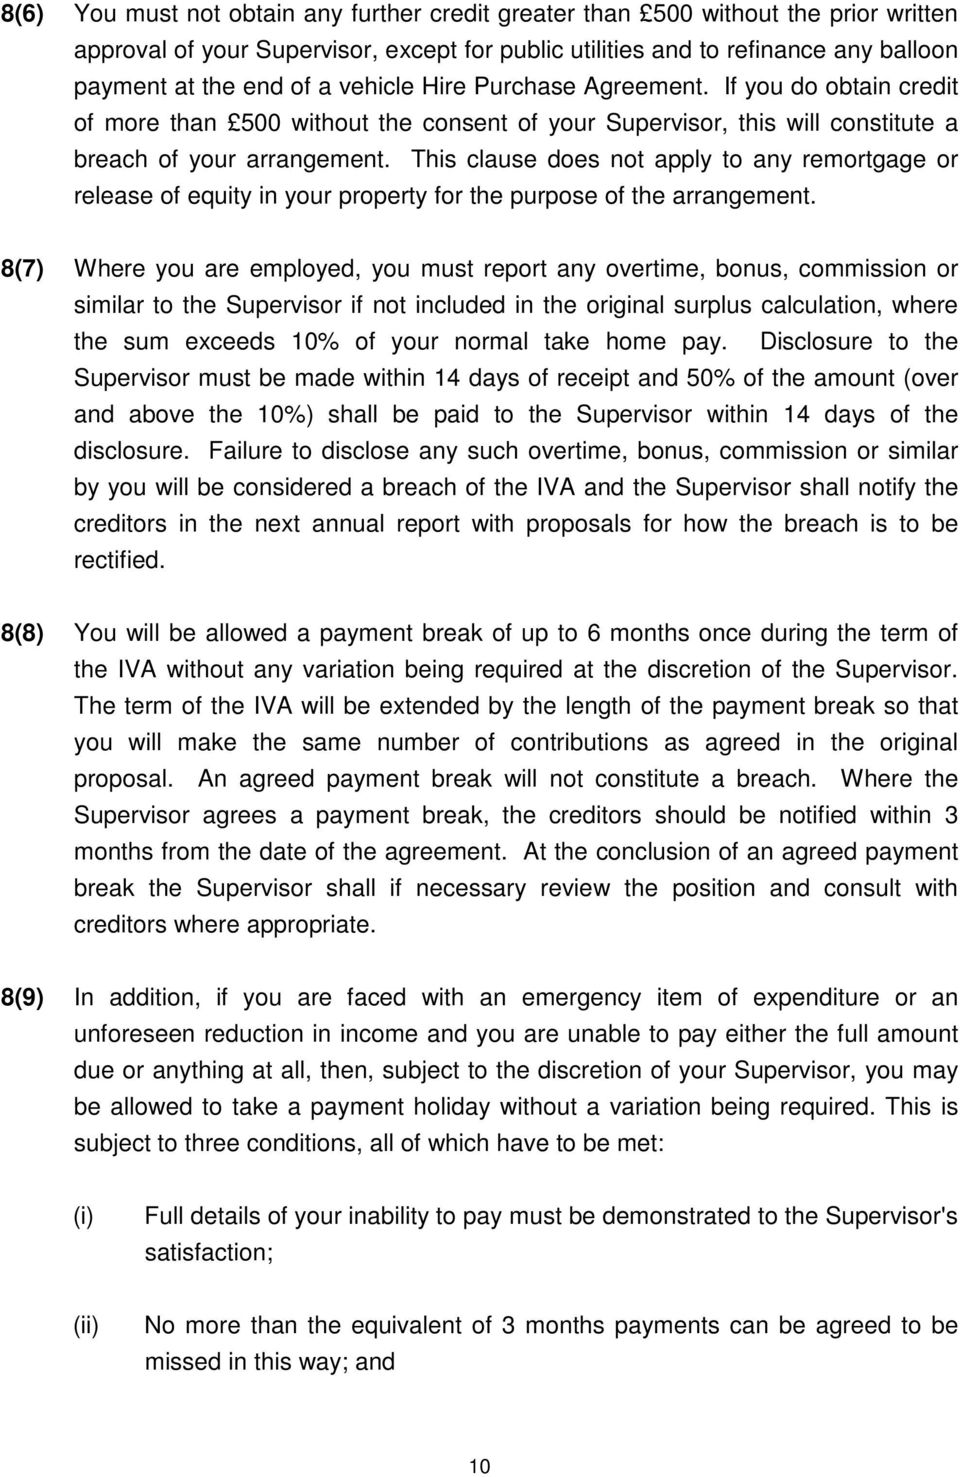 This clause does not apply to any remortgage or release of equity in your property for the purpose of the arrangement.